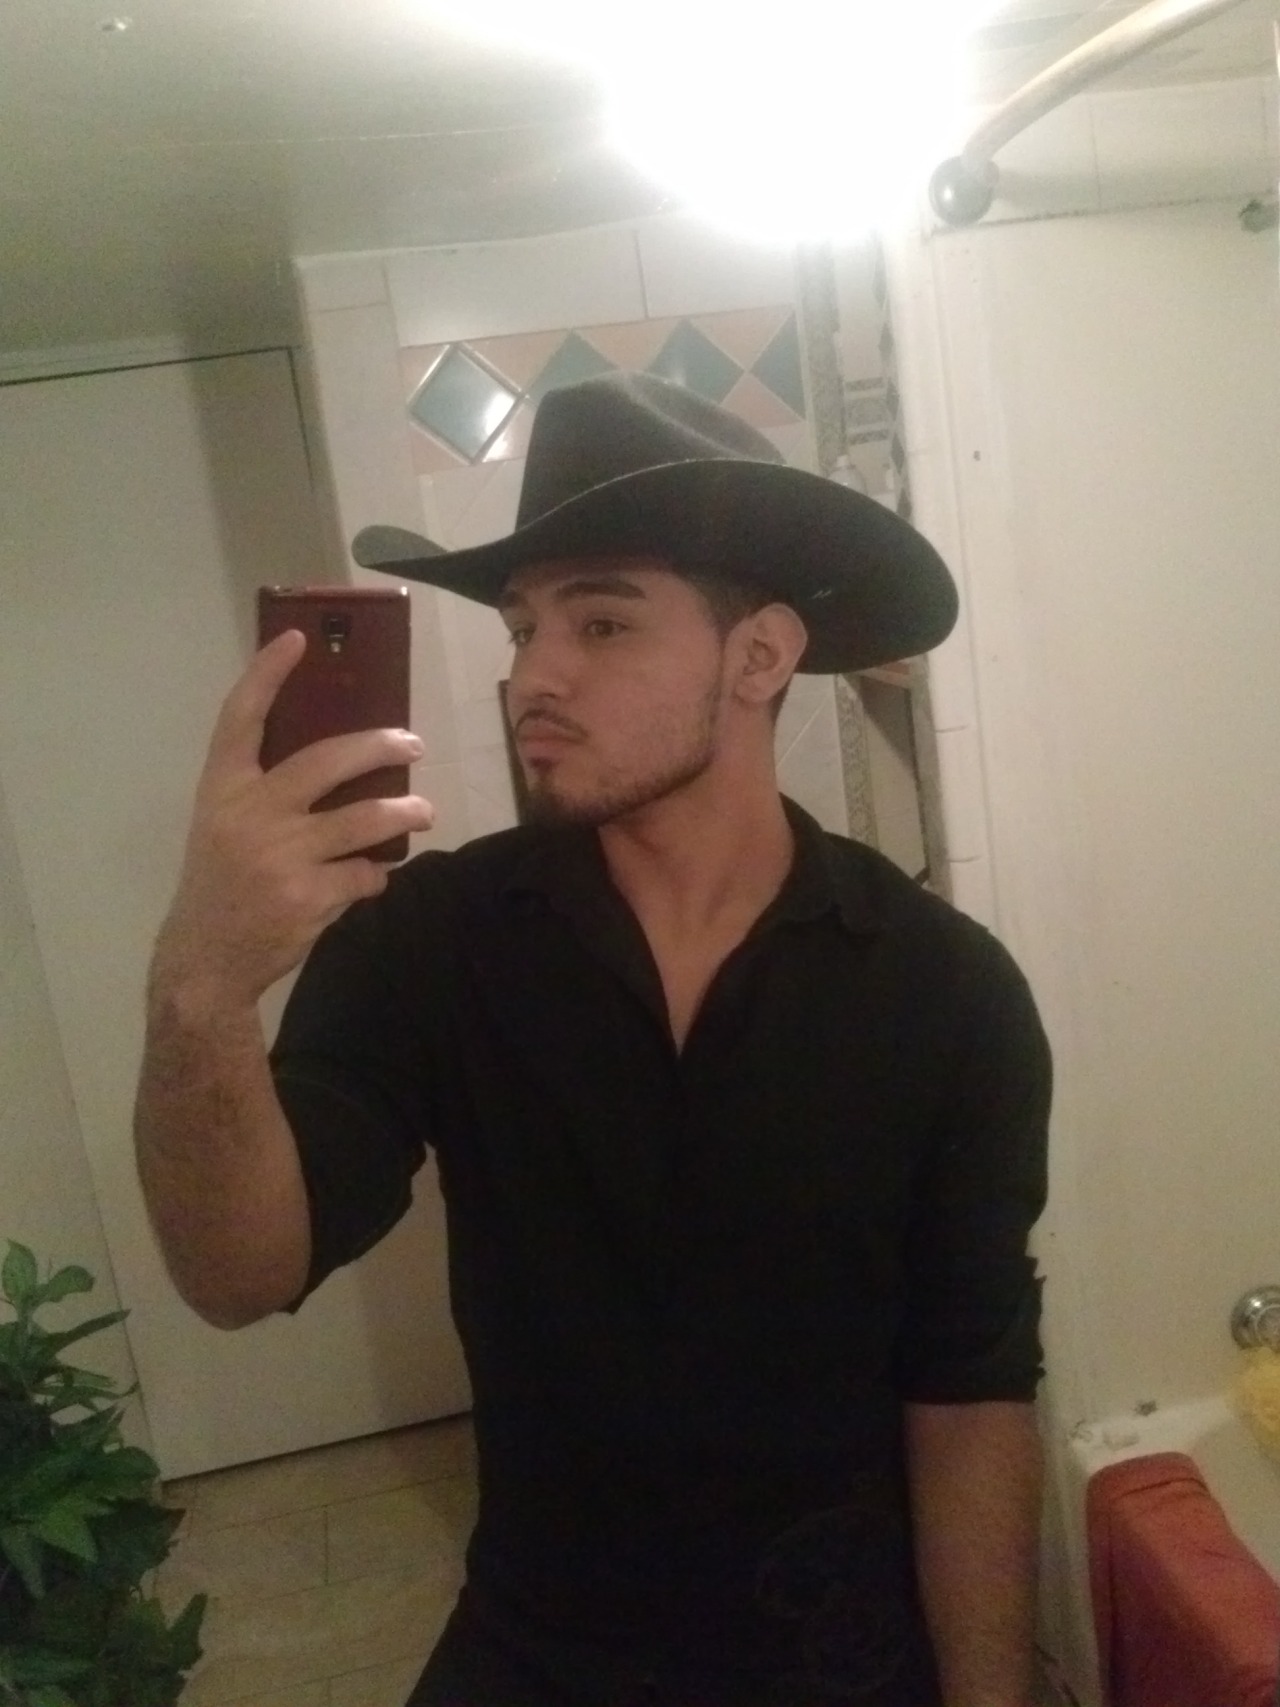  This is Mario Vela from Houston, Tx.  He’s a great guy and looking for new friends. 